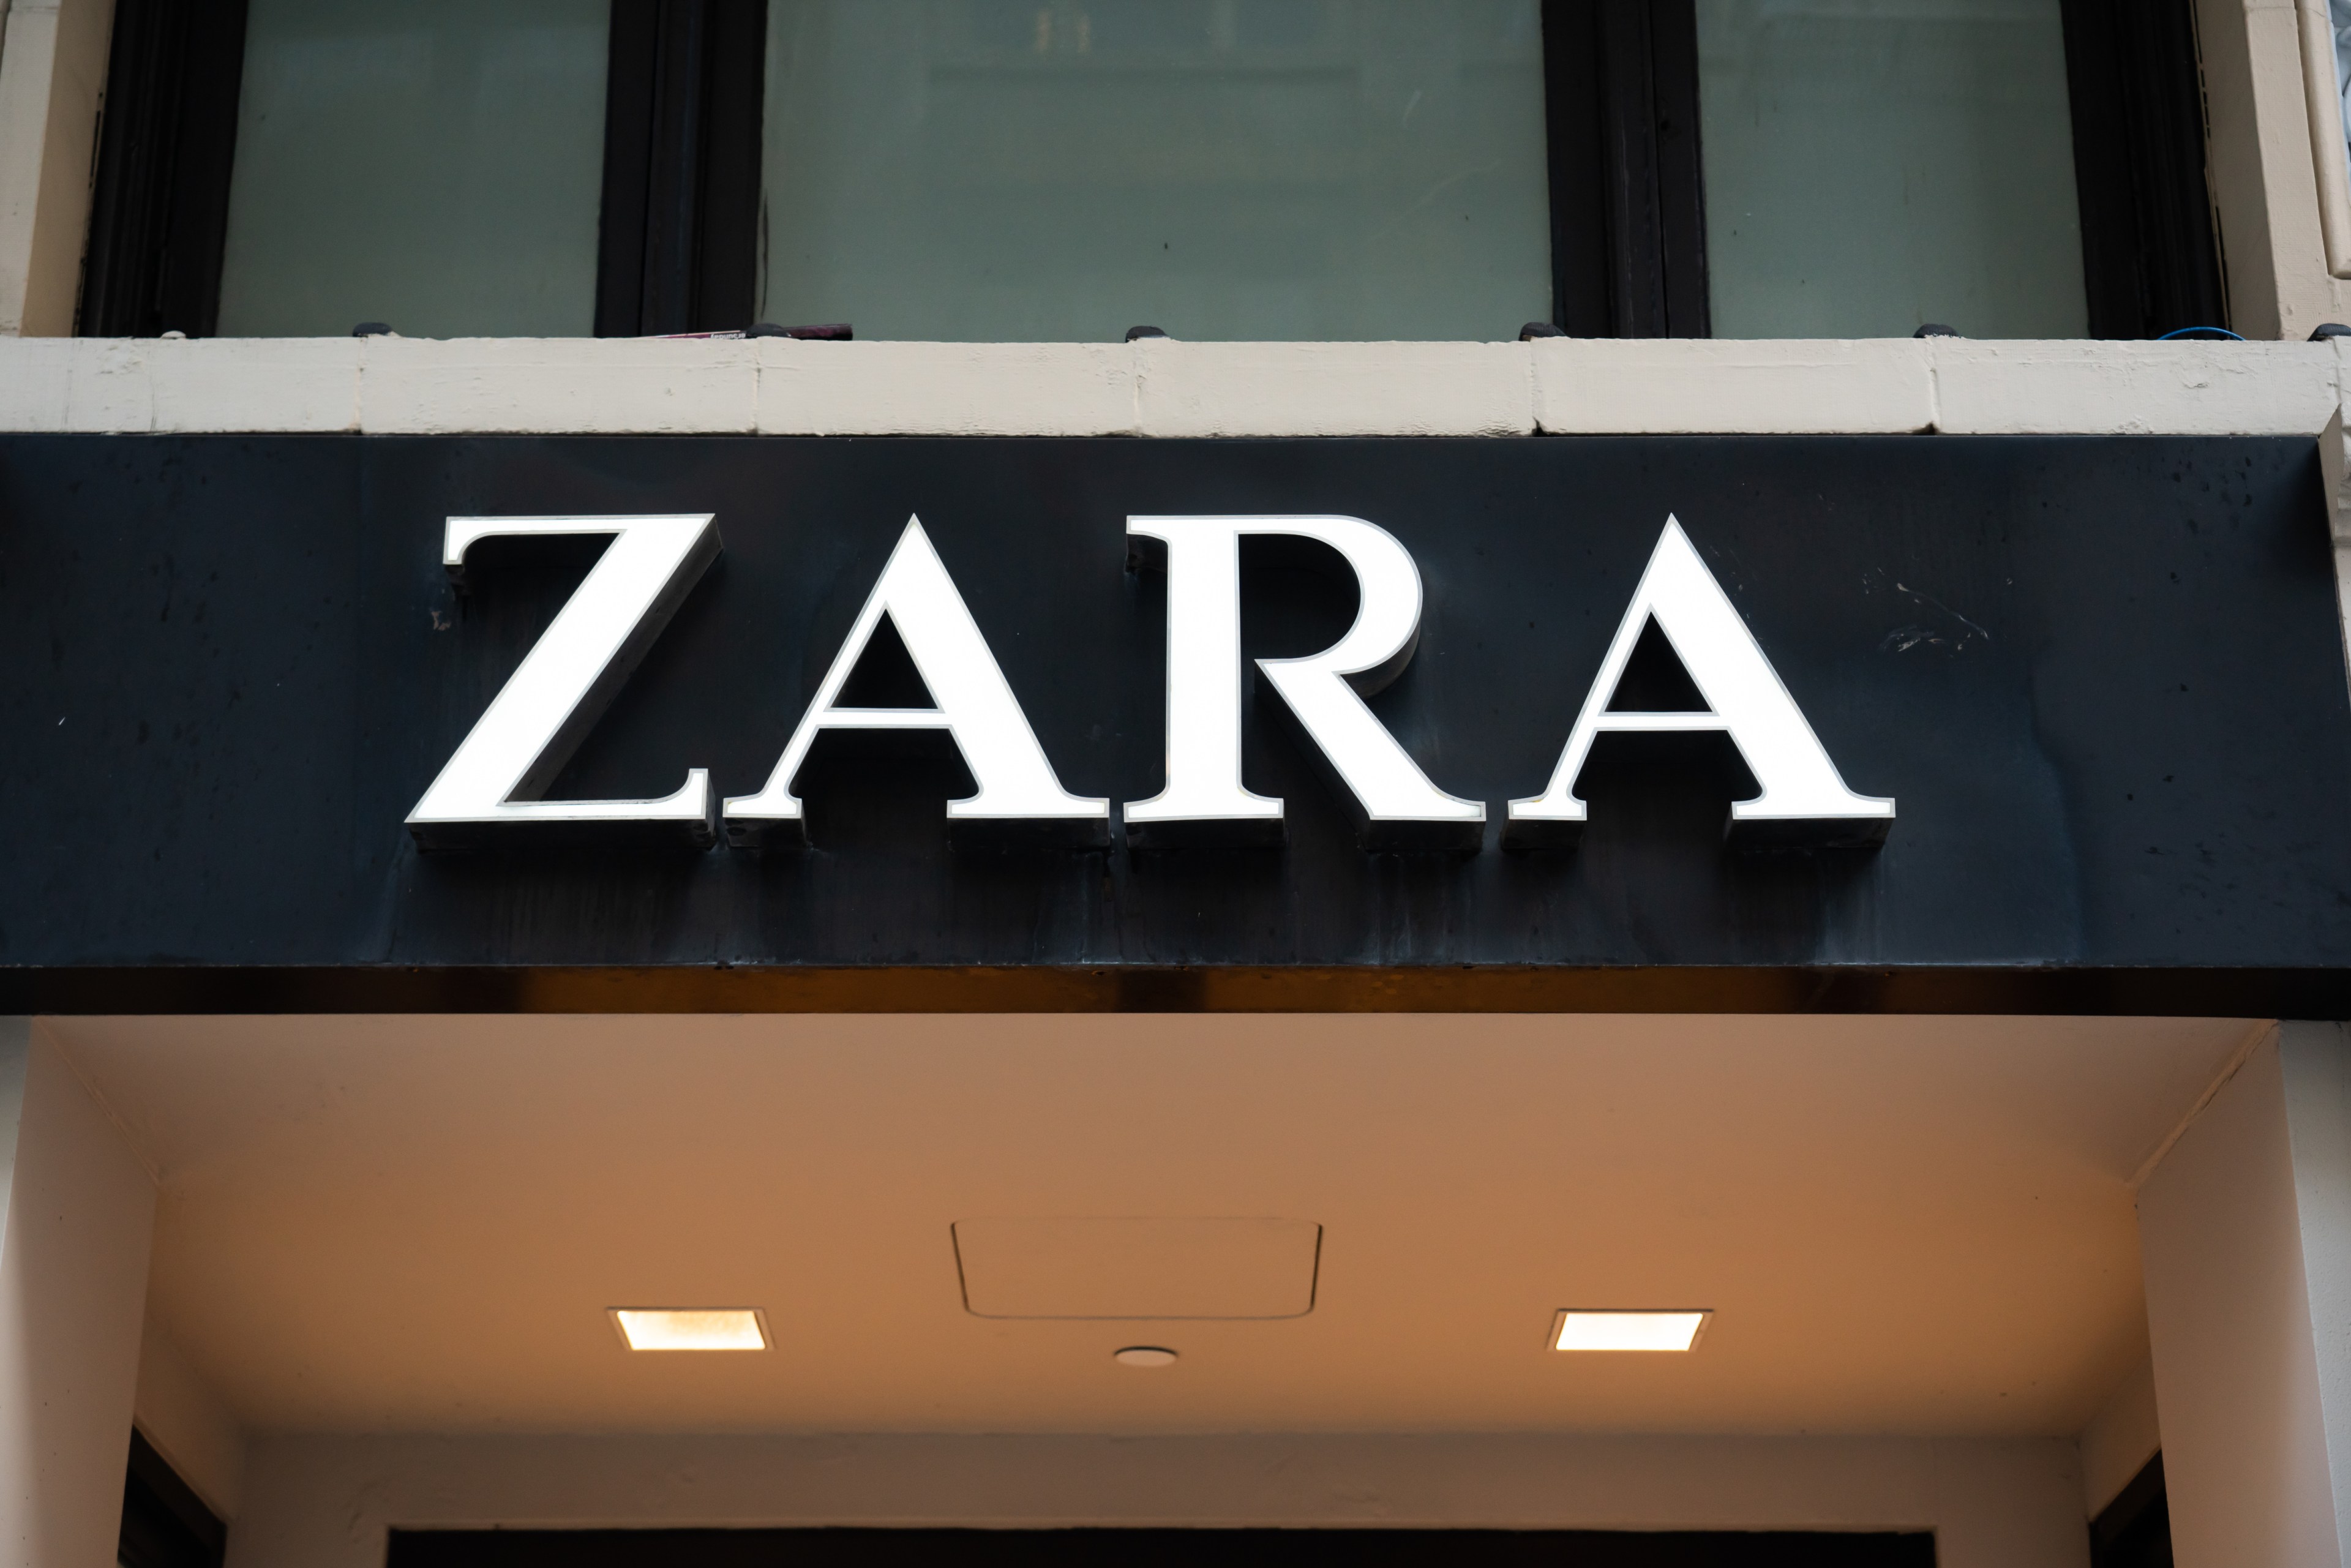 A ZARA store sign above a shop entrance with large white letters against a black background.